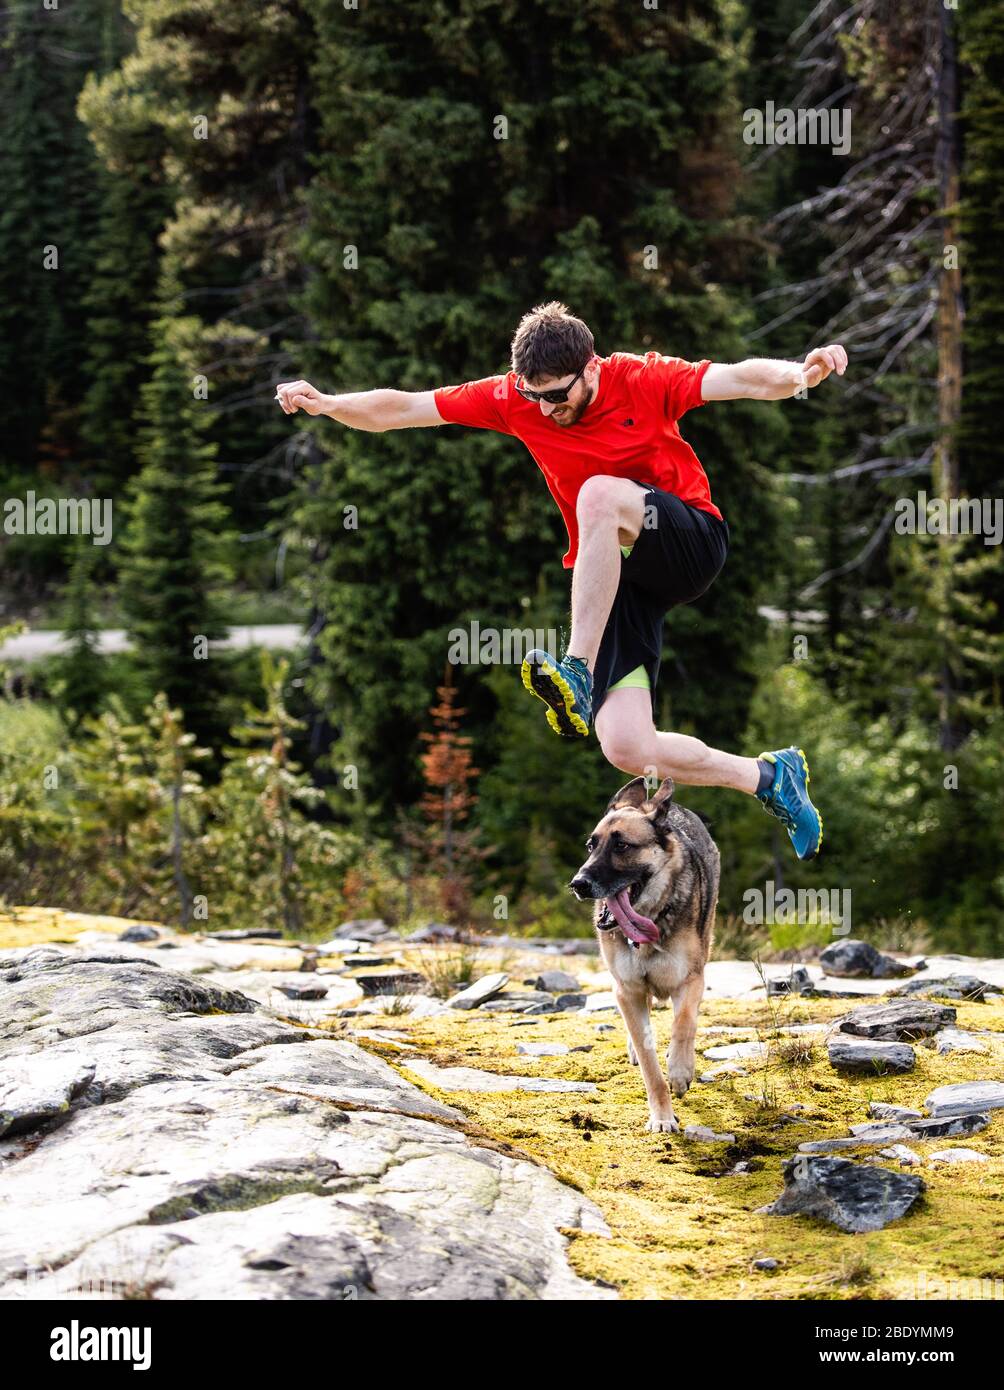 Man jumps over dog as she unexpectedly cut in front of him. Stock Photo